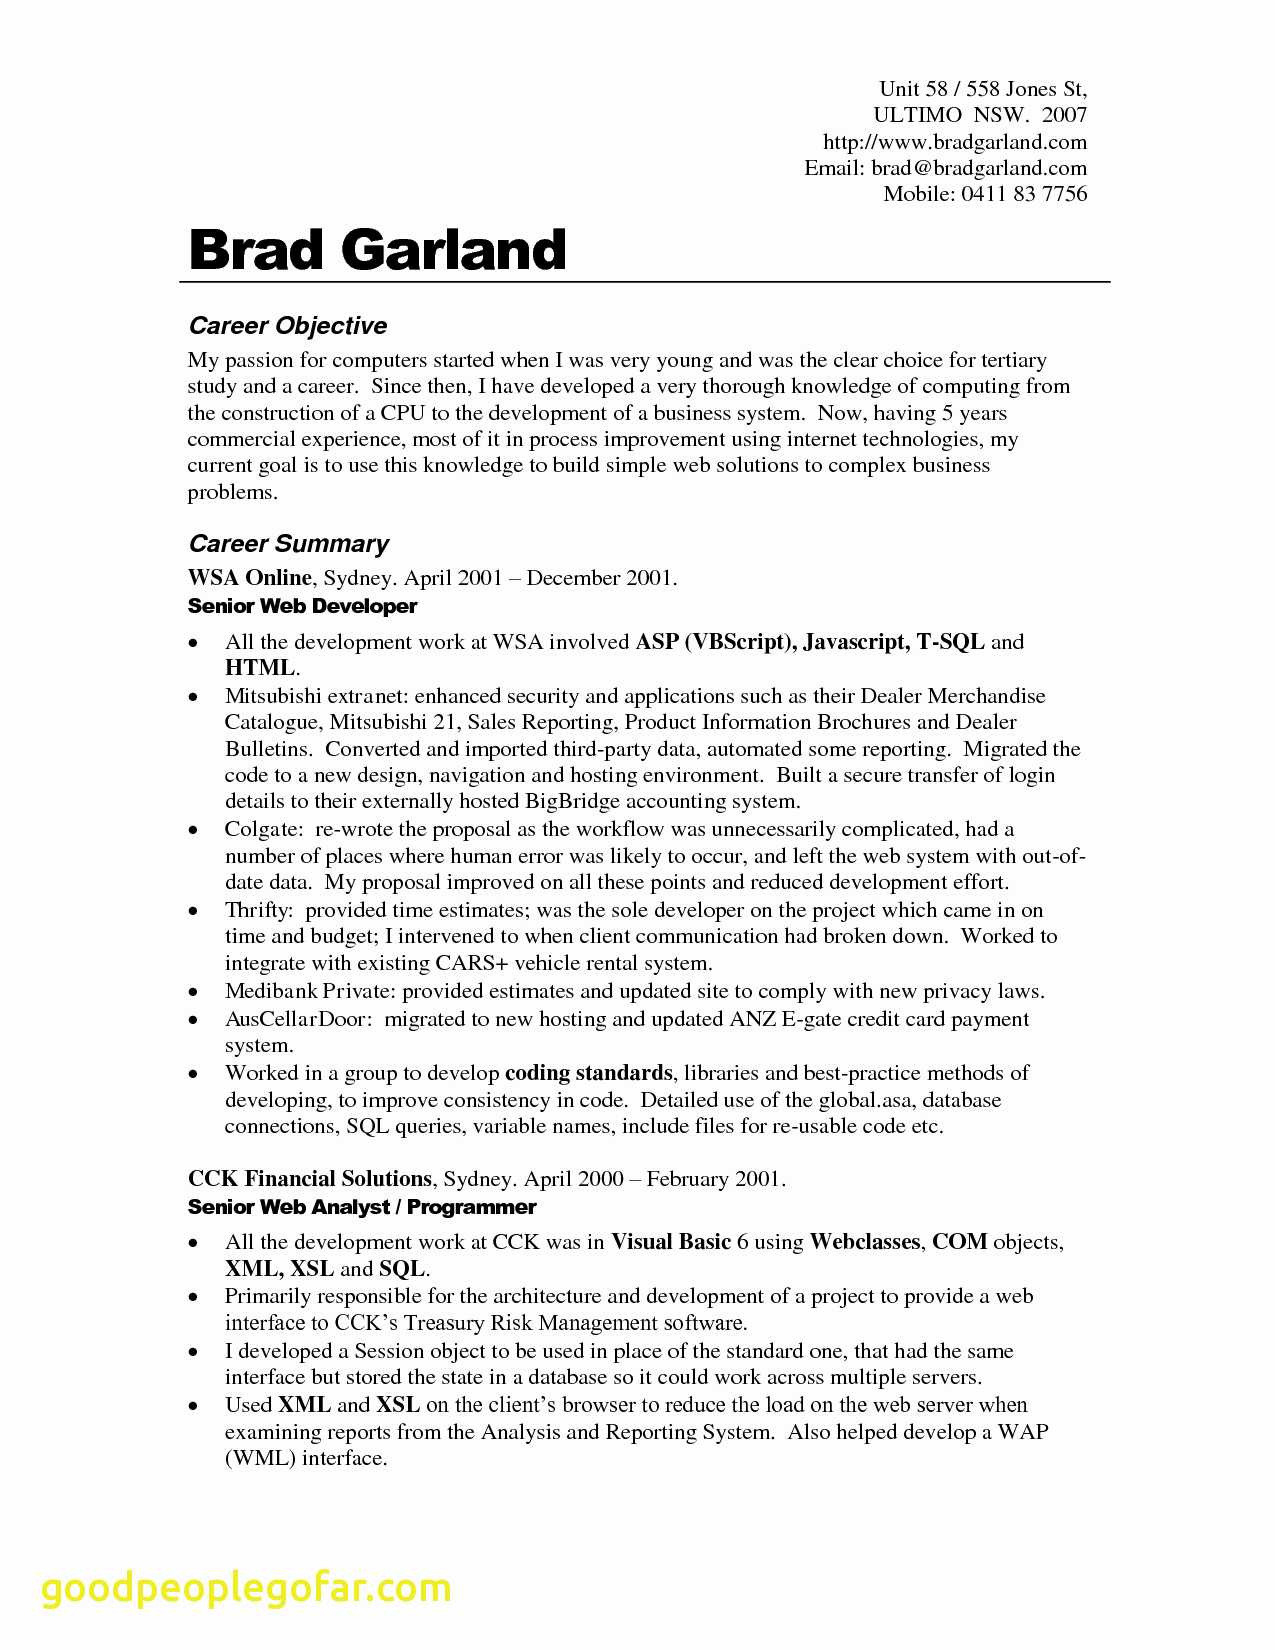 Hvac Cover Letter Template Collection | Letter Template ...